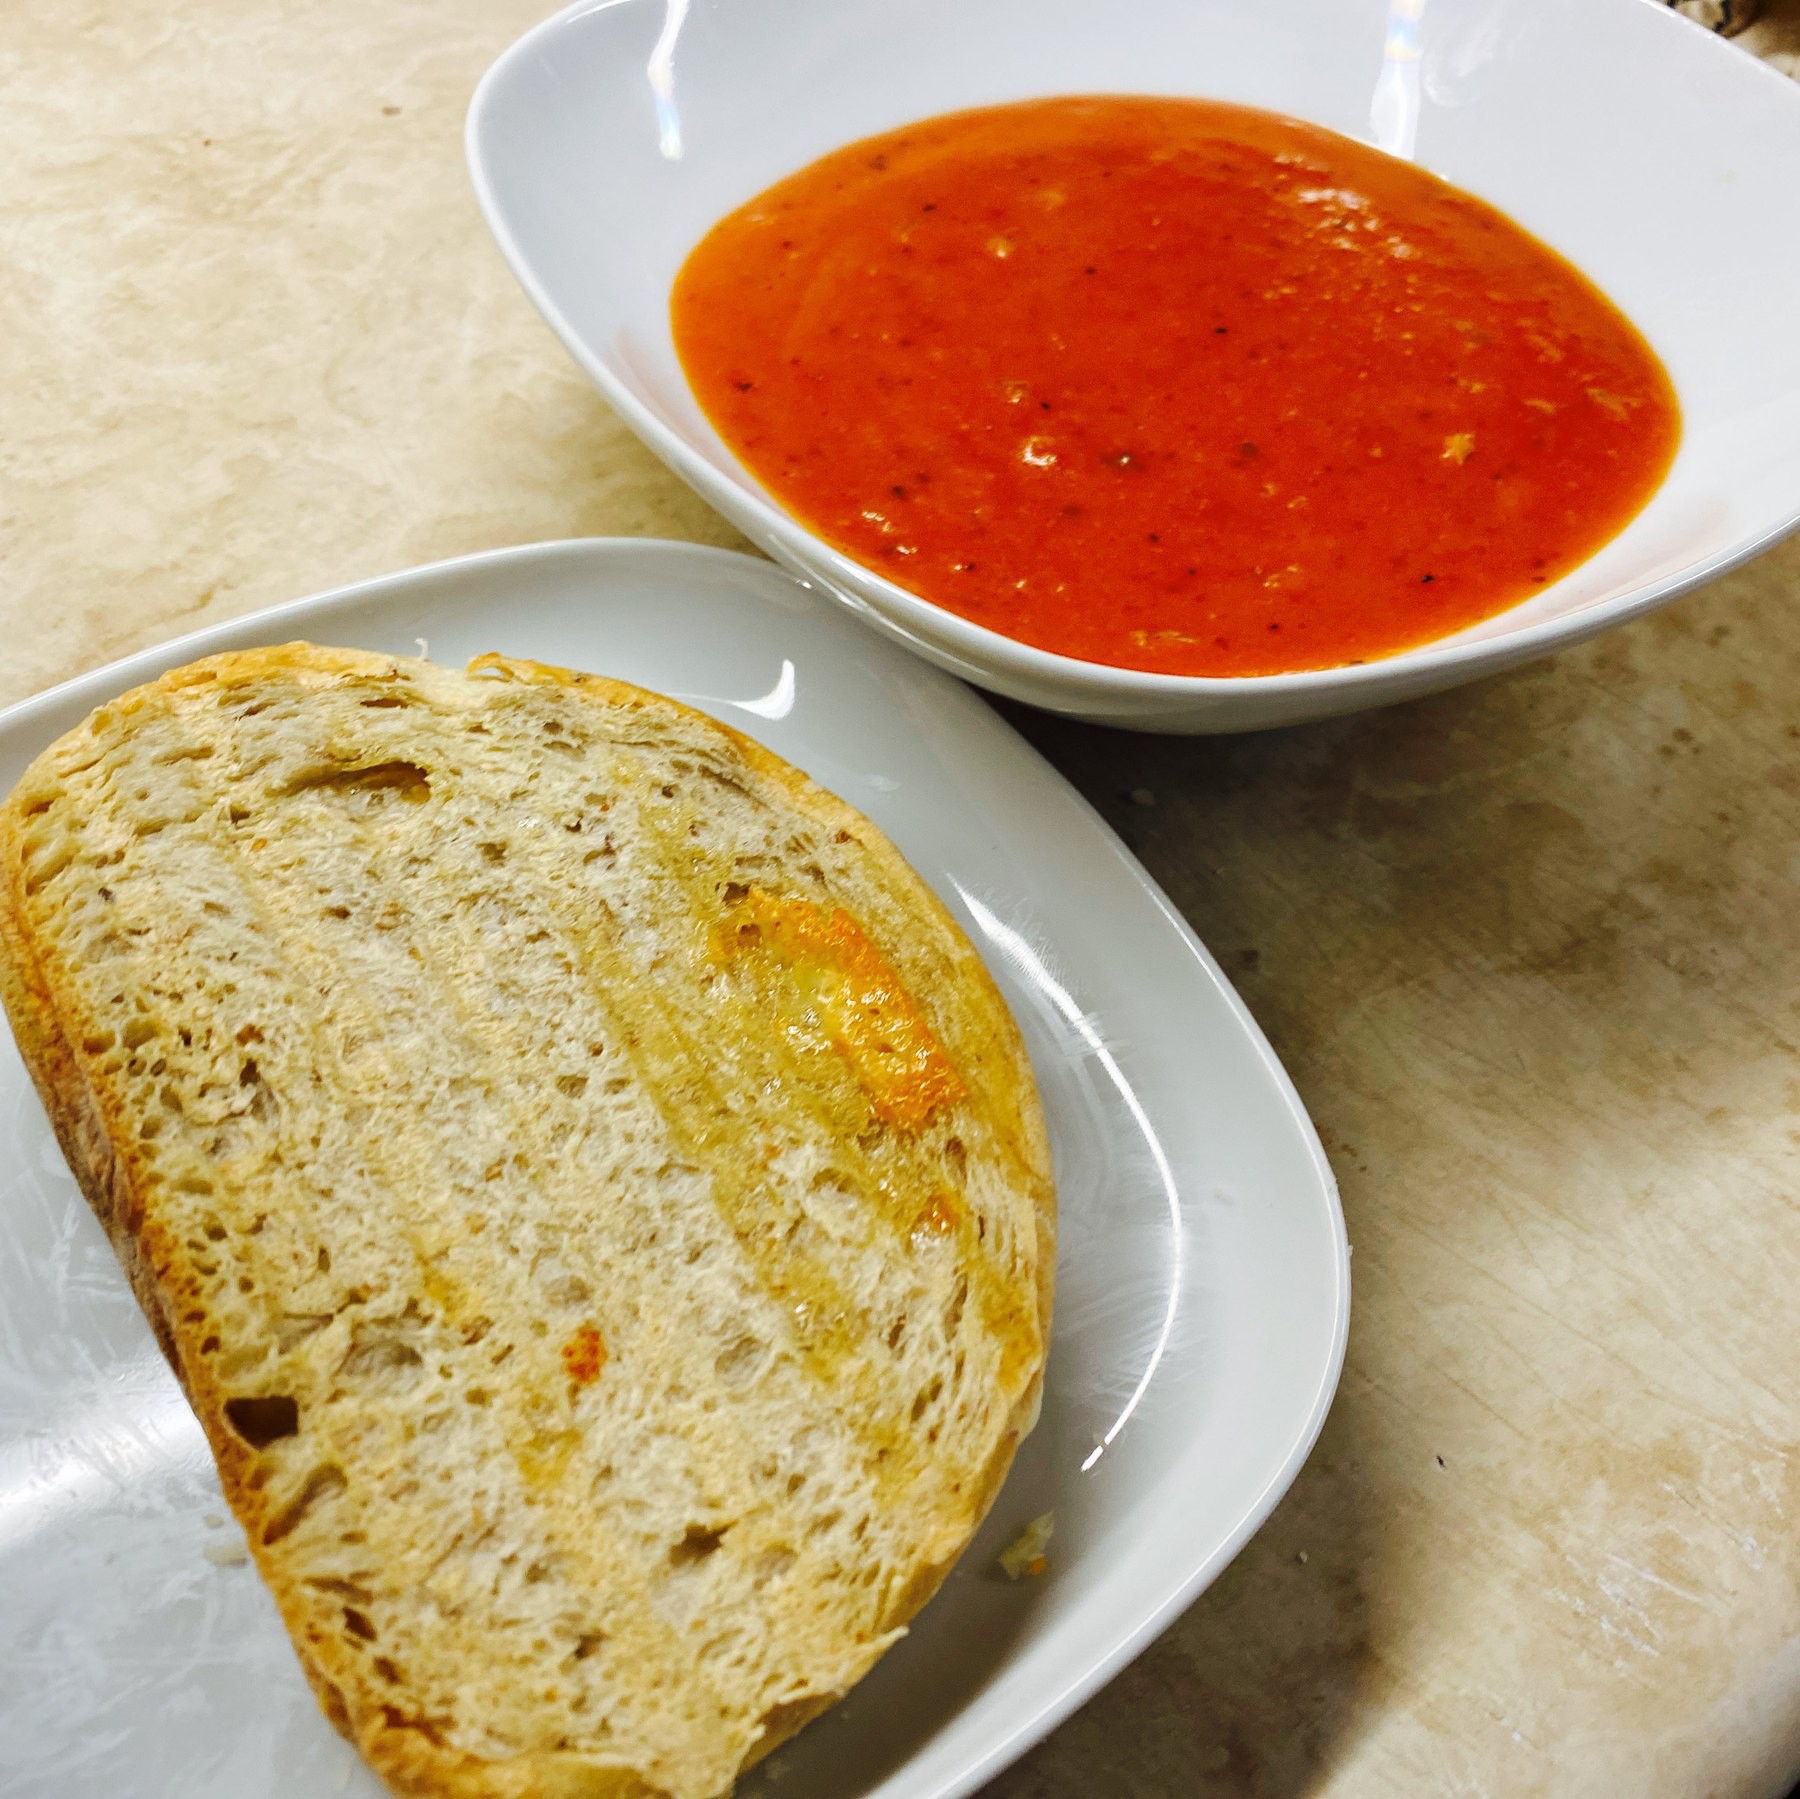 Grilled cheese sandwich on plate and bowl of tomato soup.